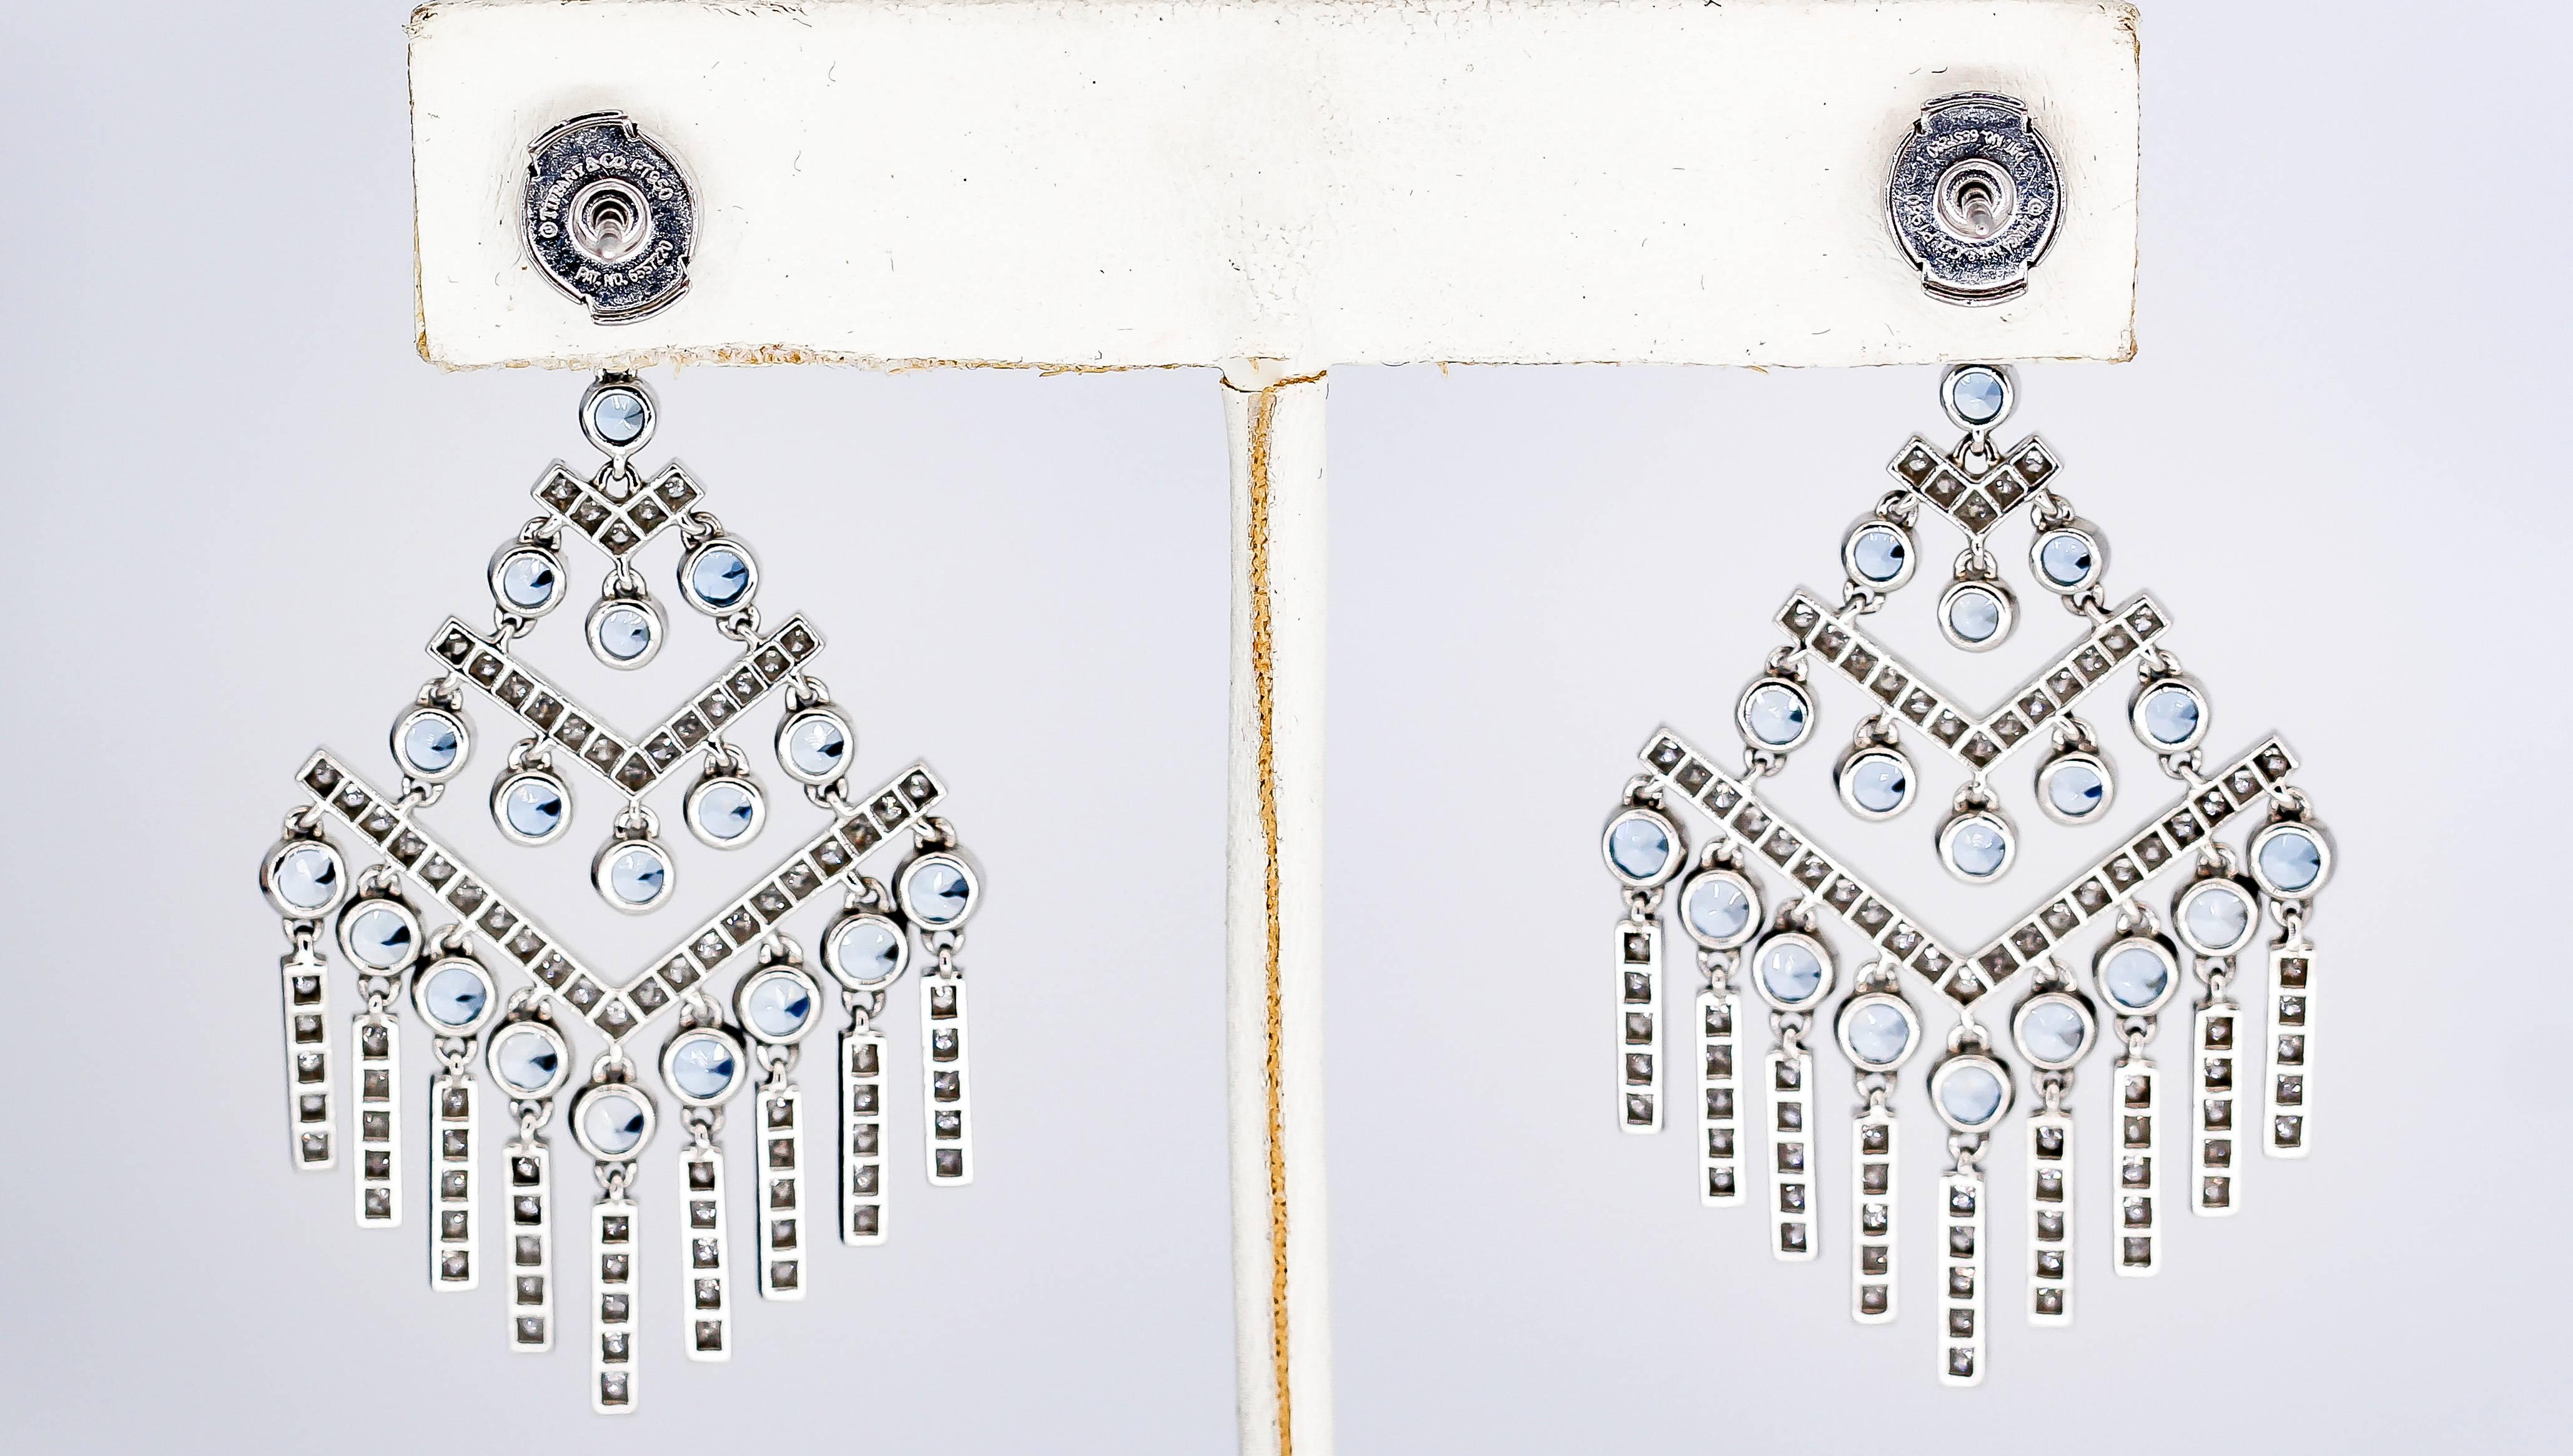 Pretty diamond, aquamarine and platinum chandelier earrings by Tiffany & Co. The earrings come from the Jazz Chevron collection by Tiffany, circa 2016-17. They feature round cut aquamarines of approx. 3-4 carats total weight, along with high grade